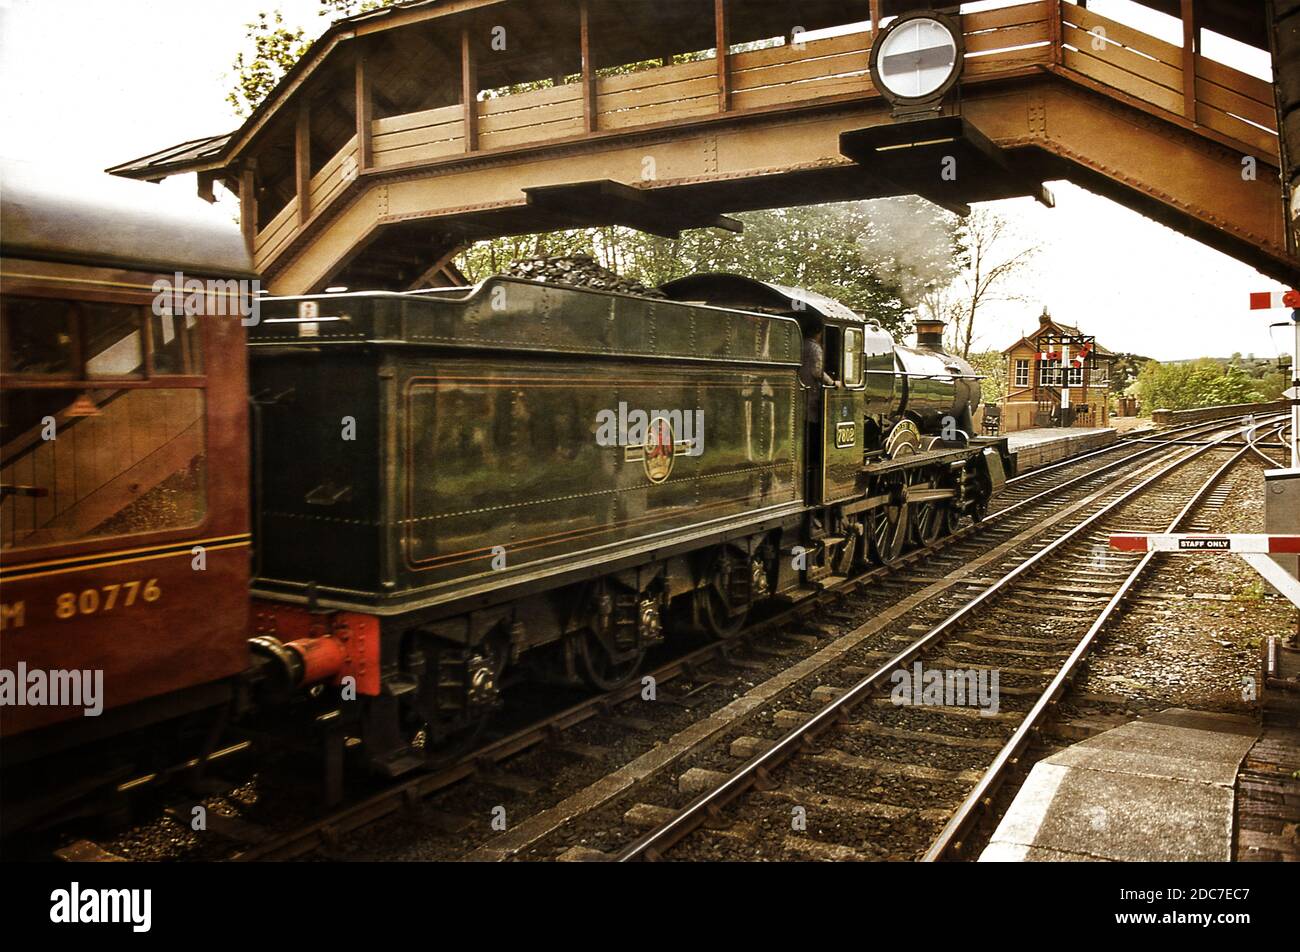 7802 Bradley Manor on the Seven Valley Railway at Bridgnoth Station Stock Photo